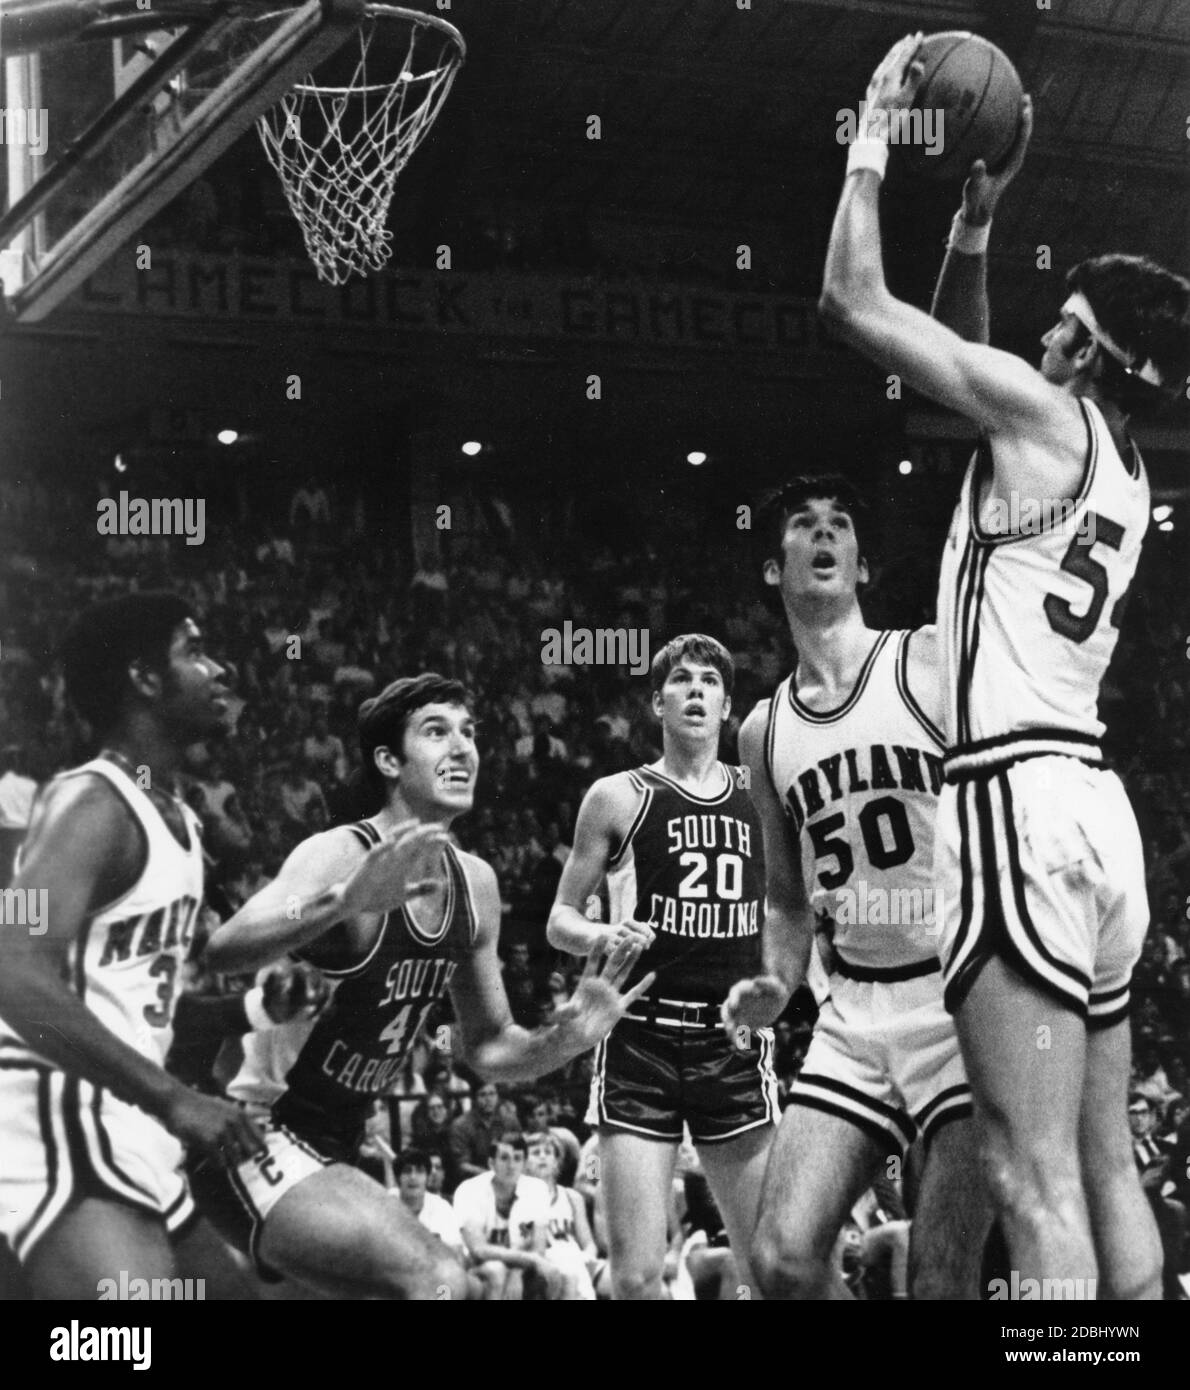 Maryland Terps player takes a jump shot at a 1970 game between the Universities of Maryland and South Carolina at Cole Field House, College Park, MD, 1970. (Photo by United States Information Agency/RBM Vintage Images) Stock Photo